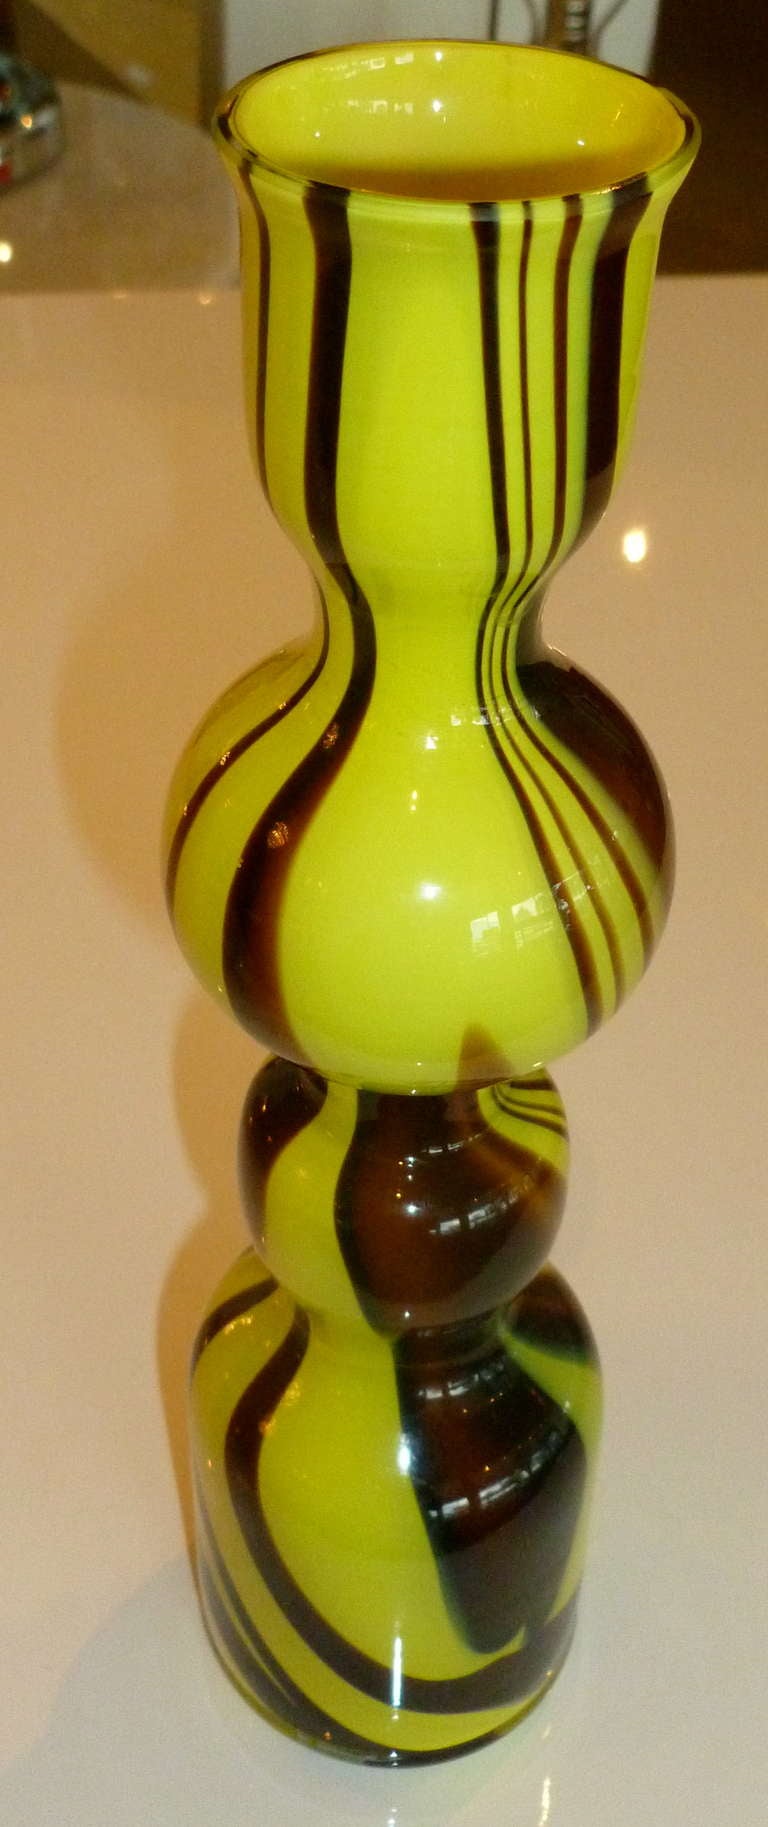 Sensual swirls of painted like color are in this gorgeous vintage Italian Murano glass vase by Carlo Moretti. Lemon yellow meets aubergine/amethyst in this stunning brilliant glass small vase. Its twisted swirls give momentum and movement. Luscious!